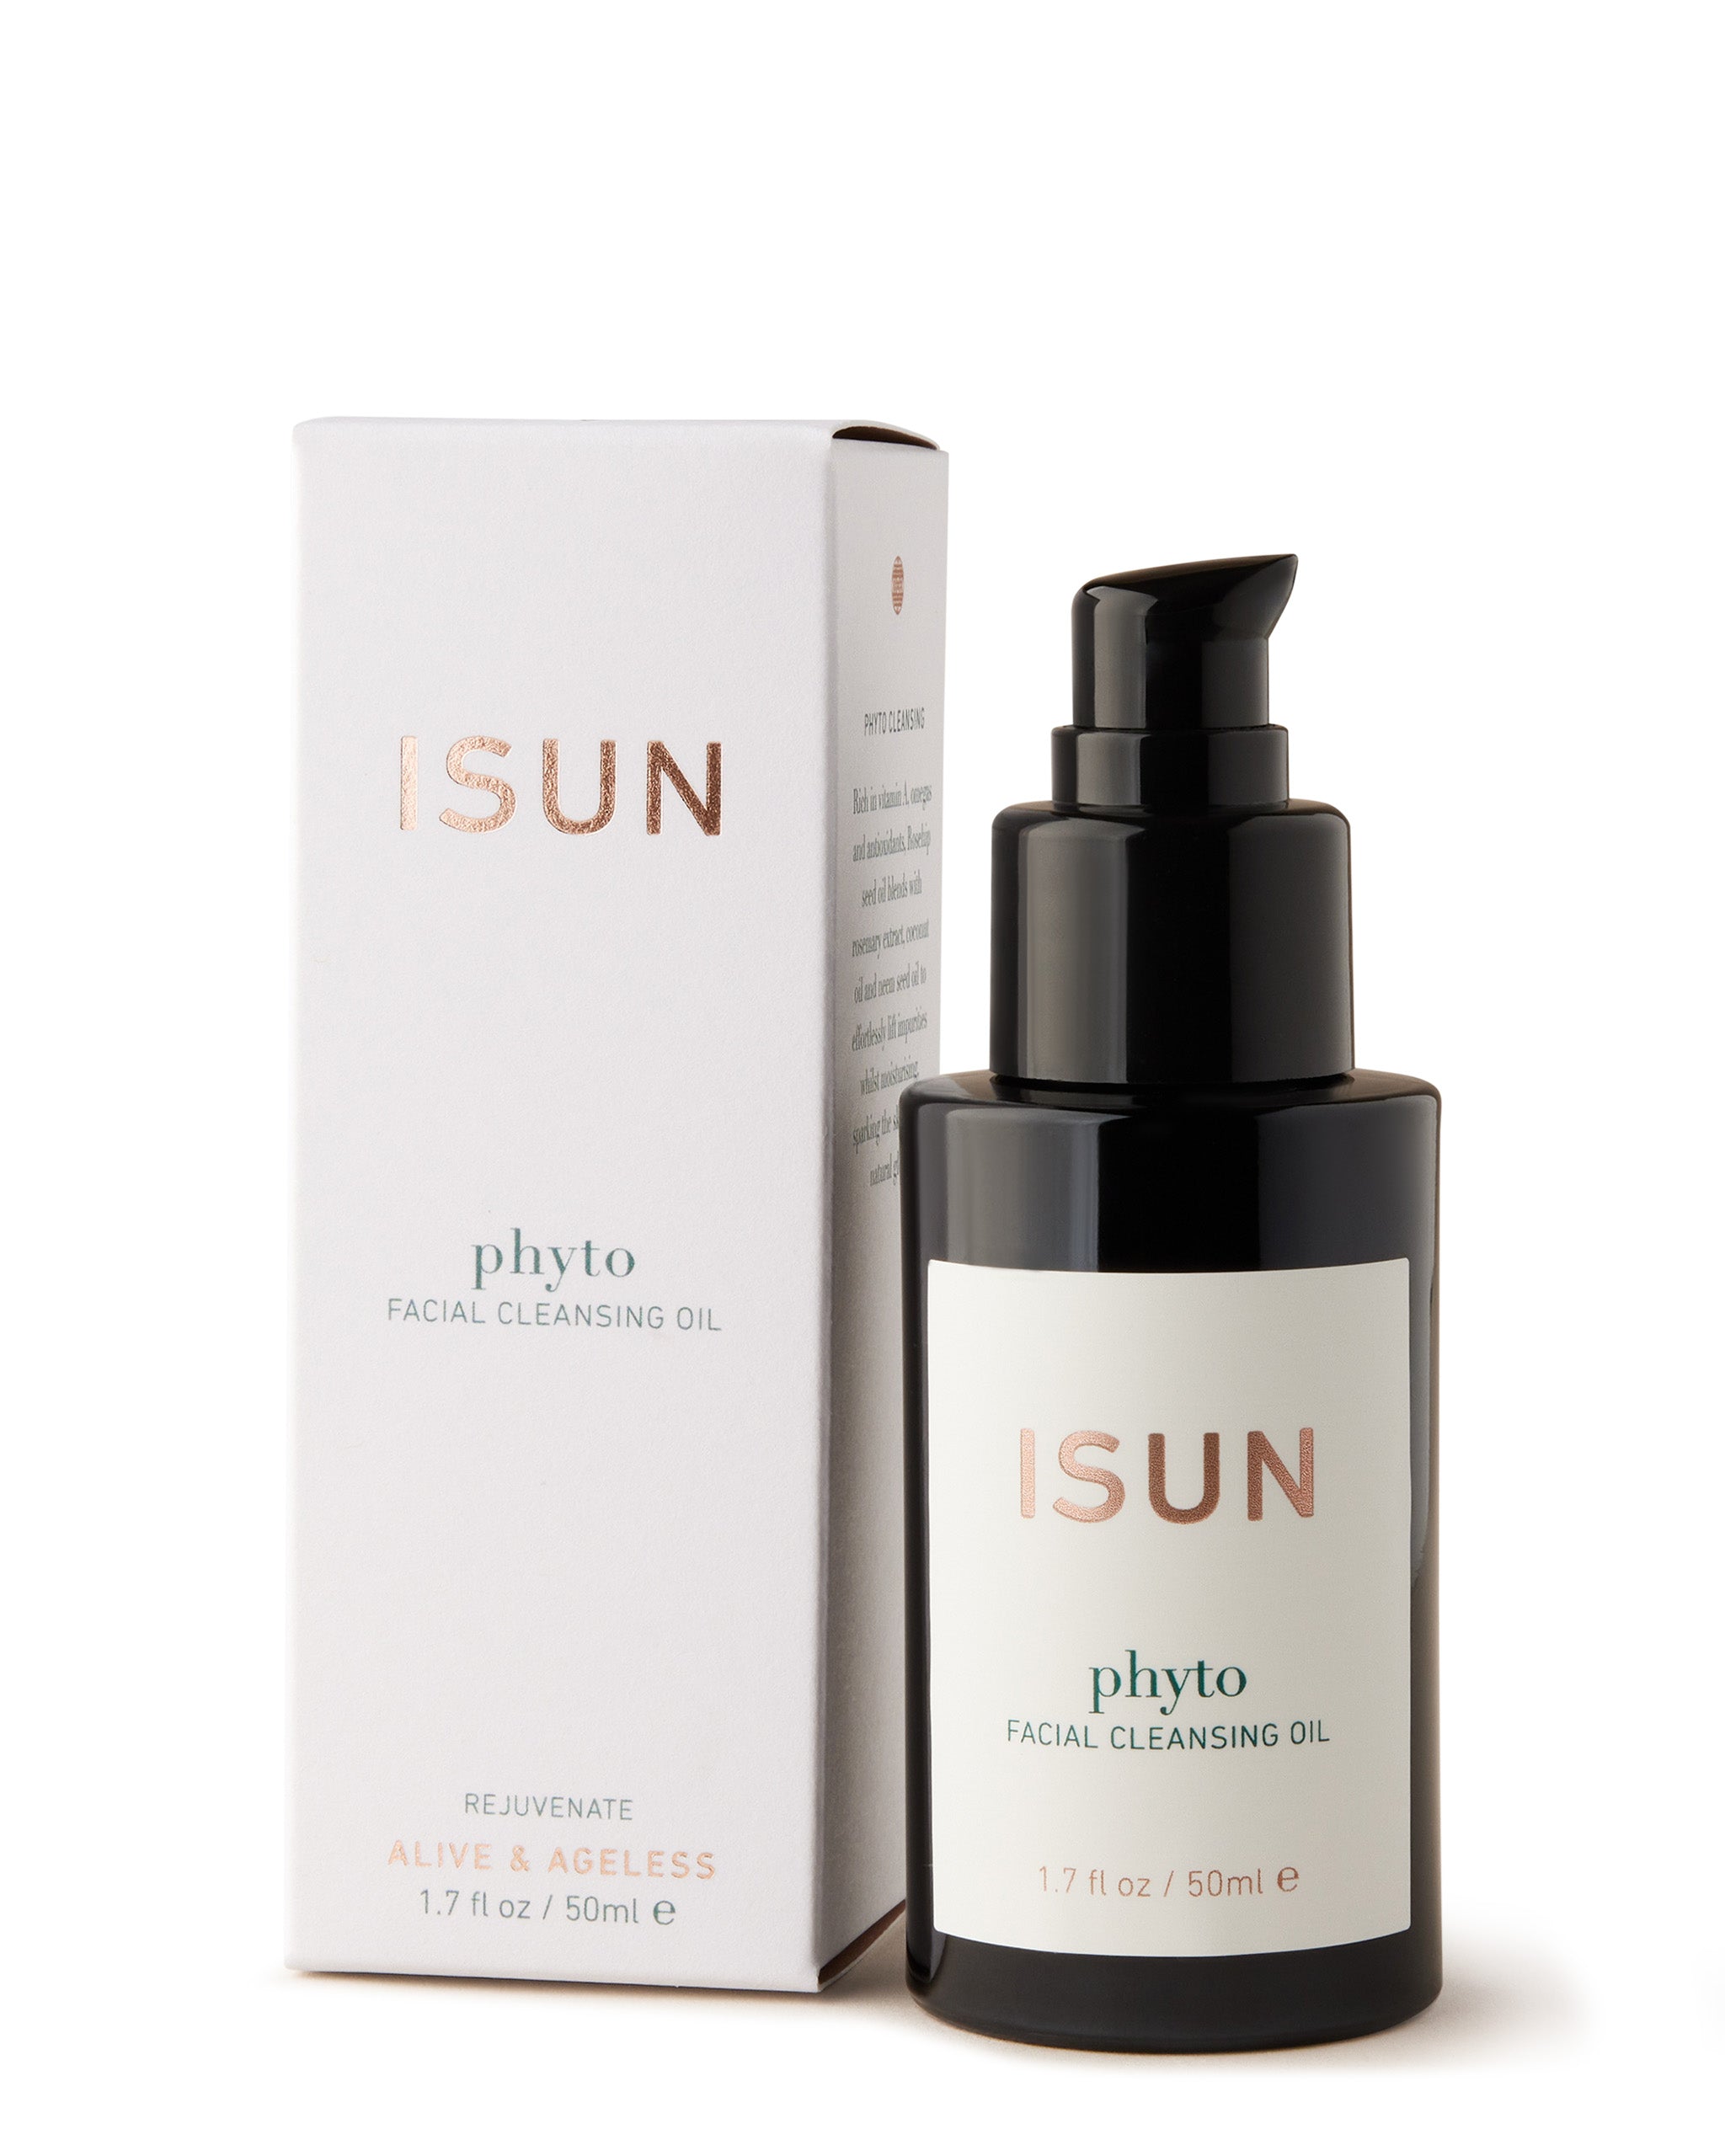 ISUN SKINCARE Phyto / Facial Cleansing Oil 50ml